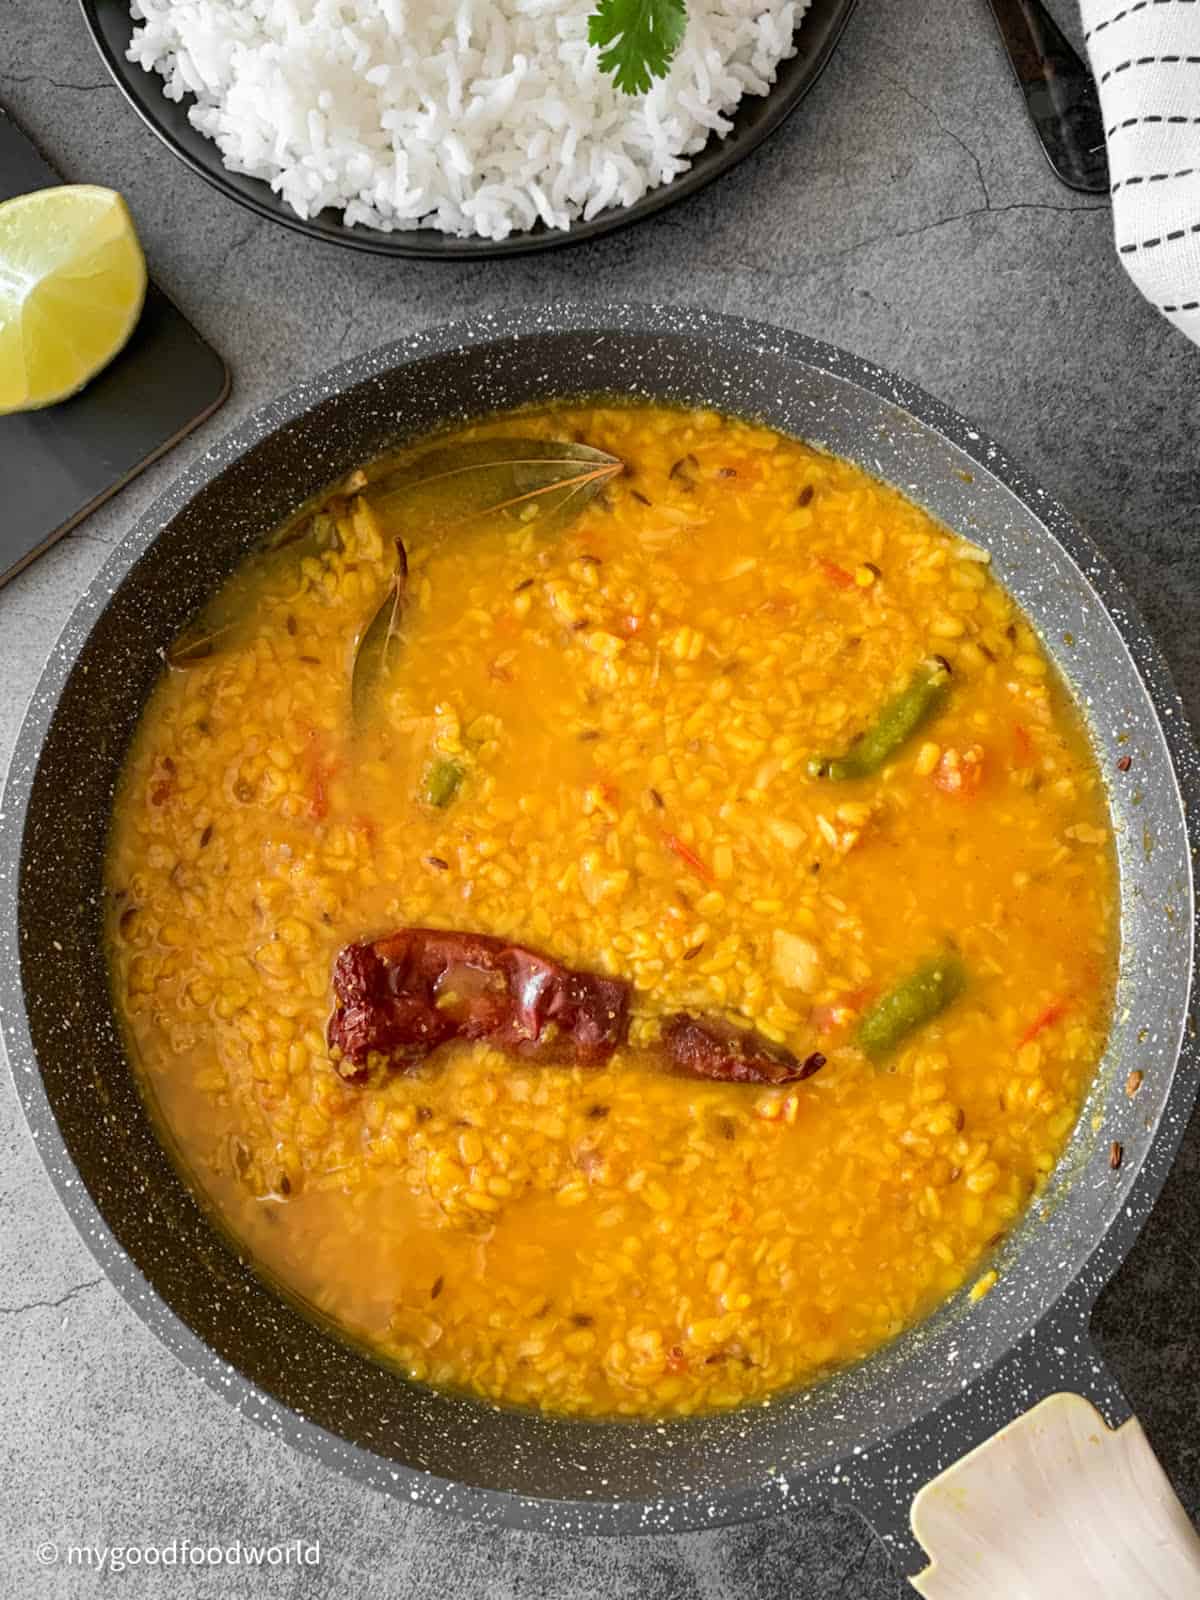 Moong lentils cooked with simple spices such as cumin, tomatoes and chilies is placed in a skillet. The skillet is placed on a dark colored table where a piece of lime and some cooked white rice are also placed.